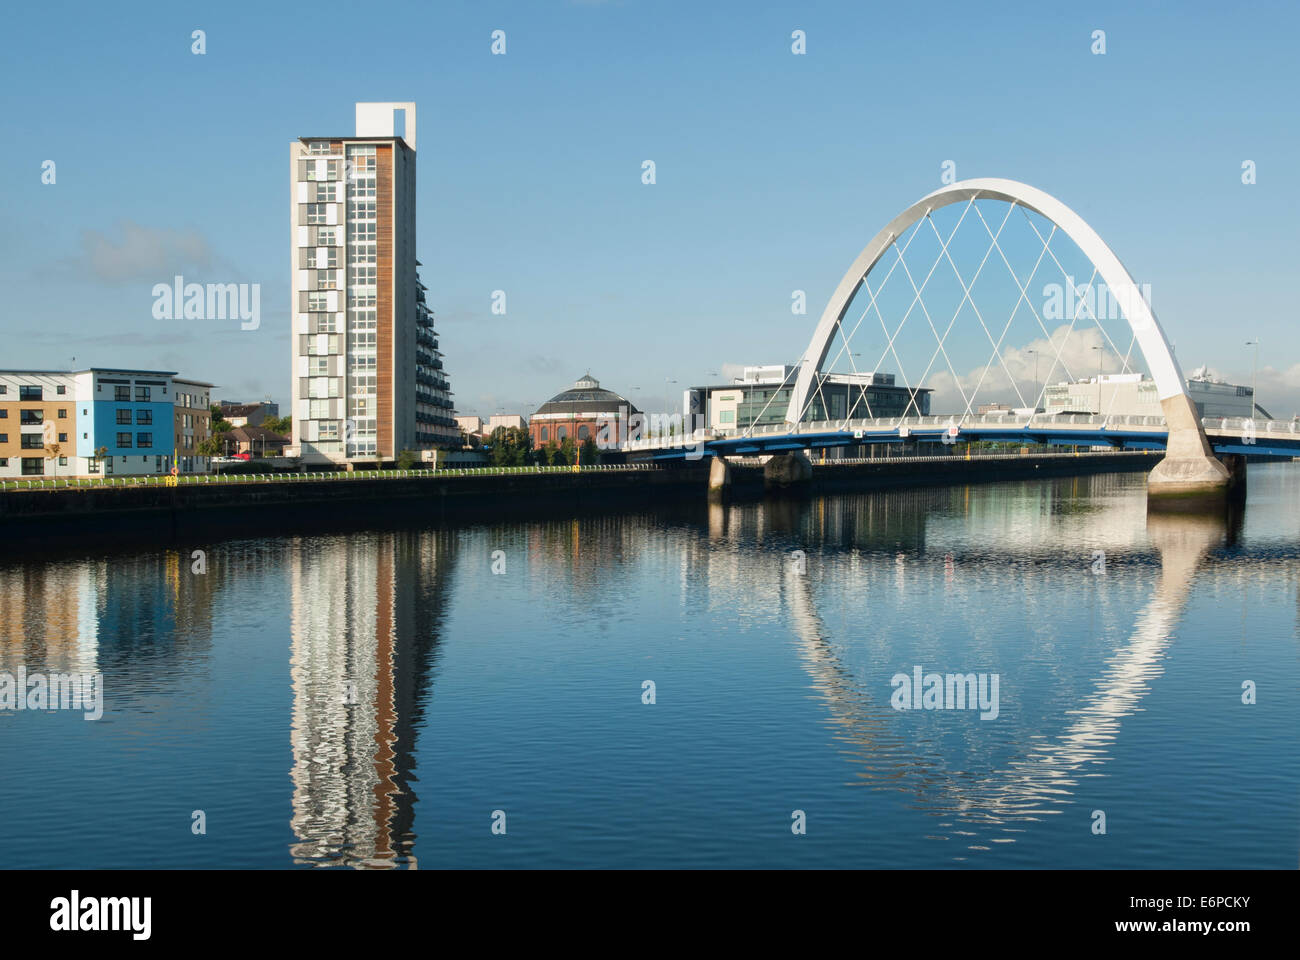 Clyde Arc 'Squinty' ponte sul fiume Clyde, Glasgow Foto Stock